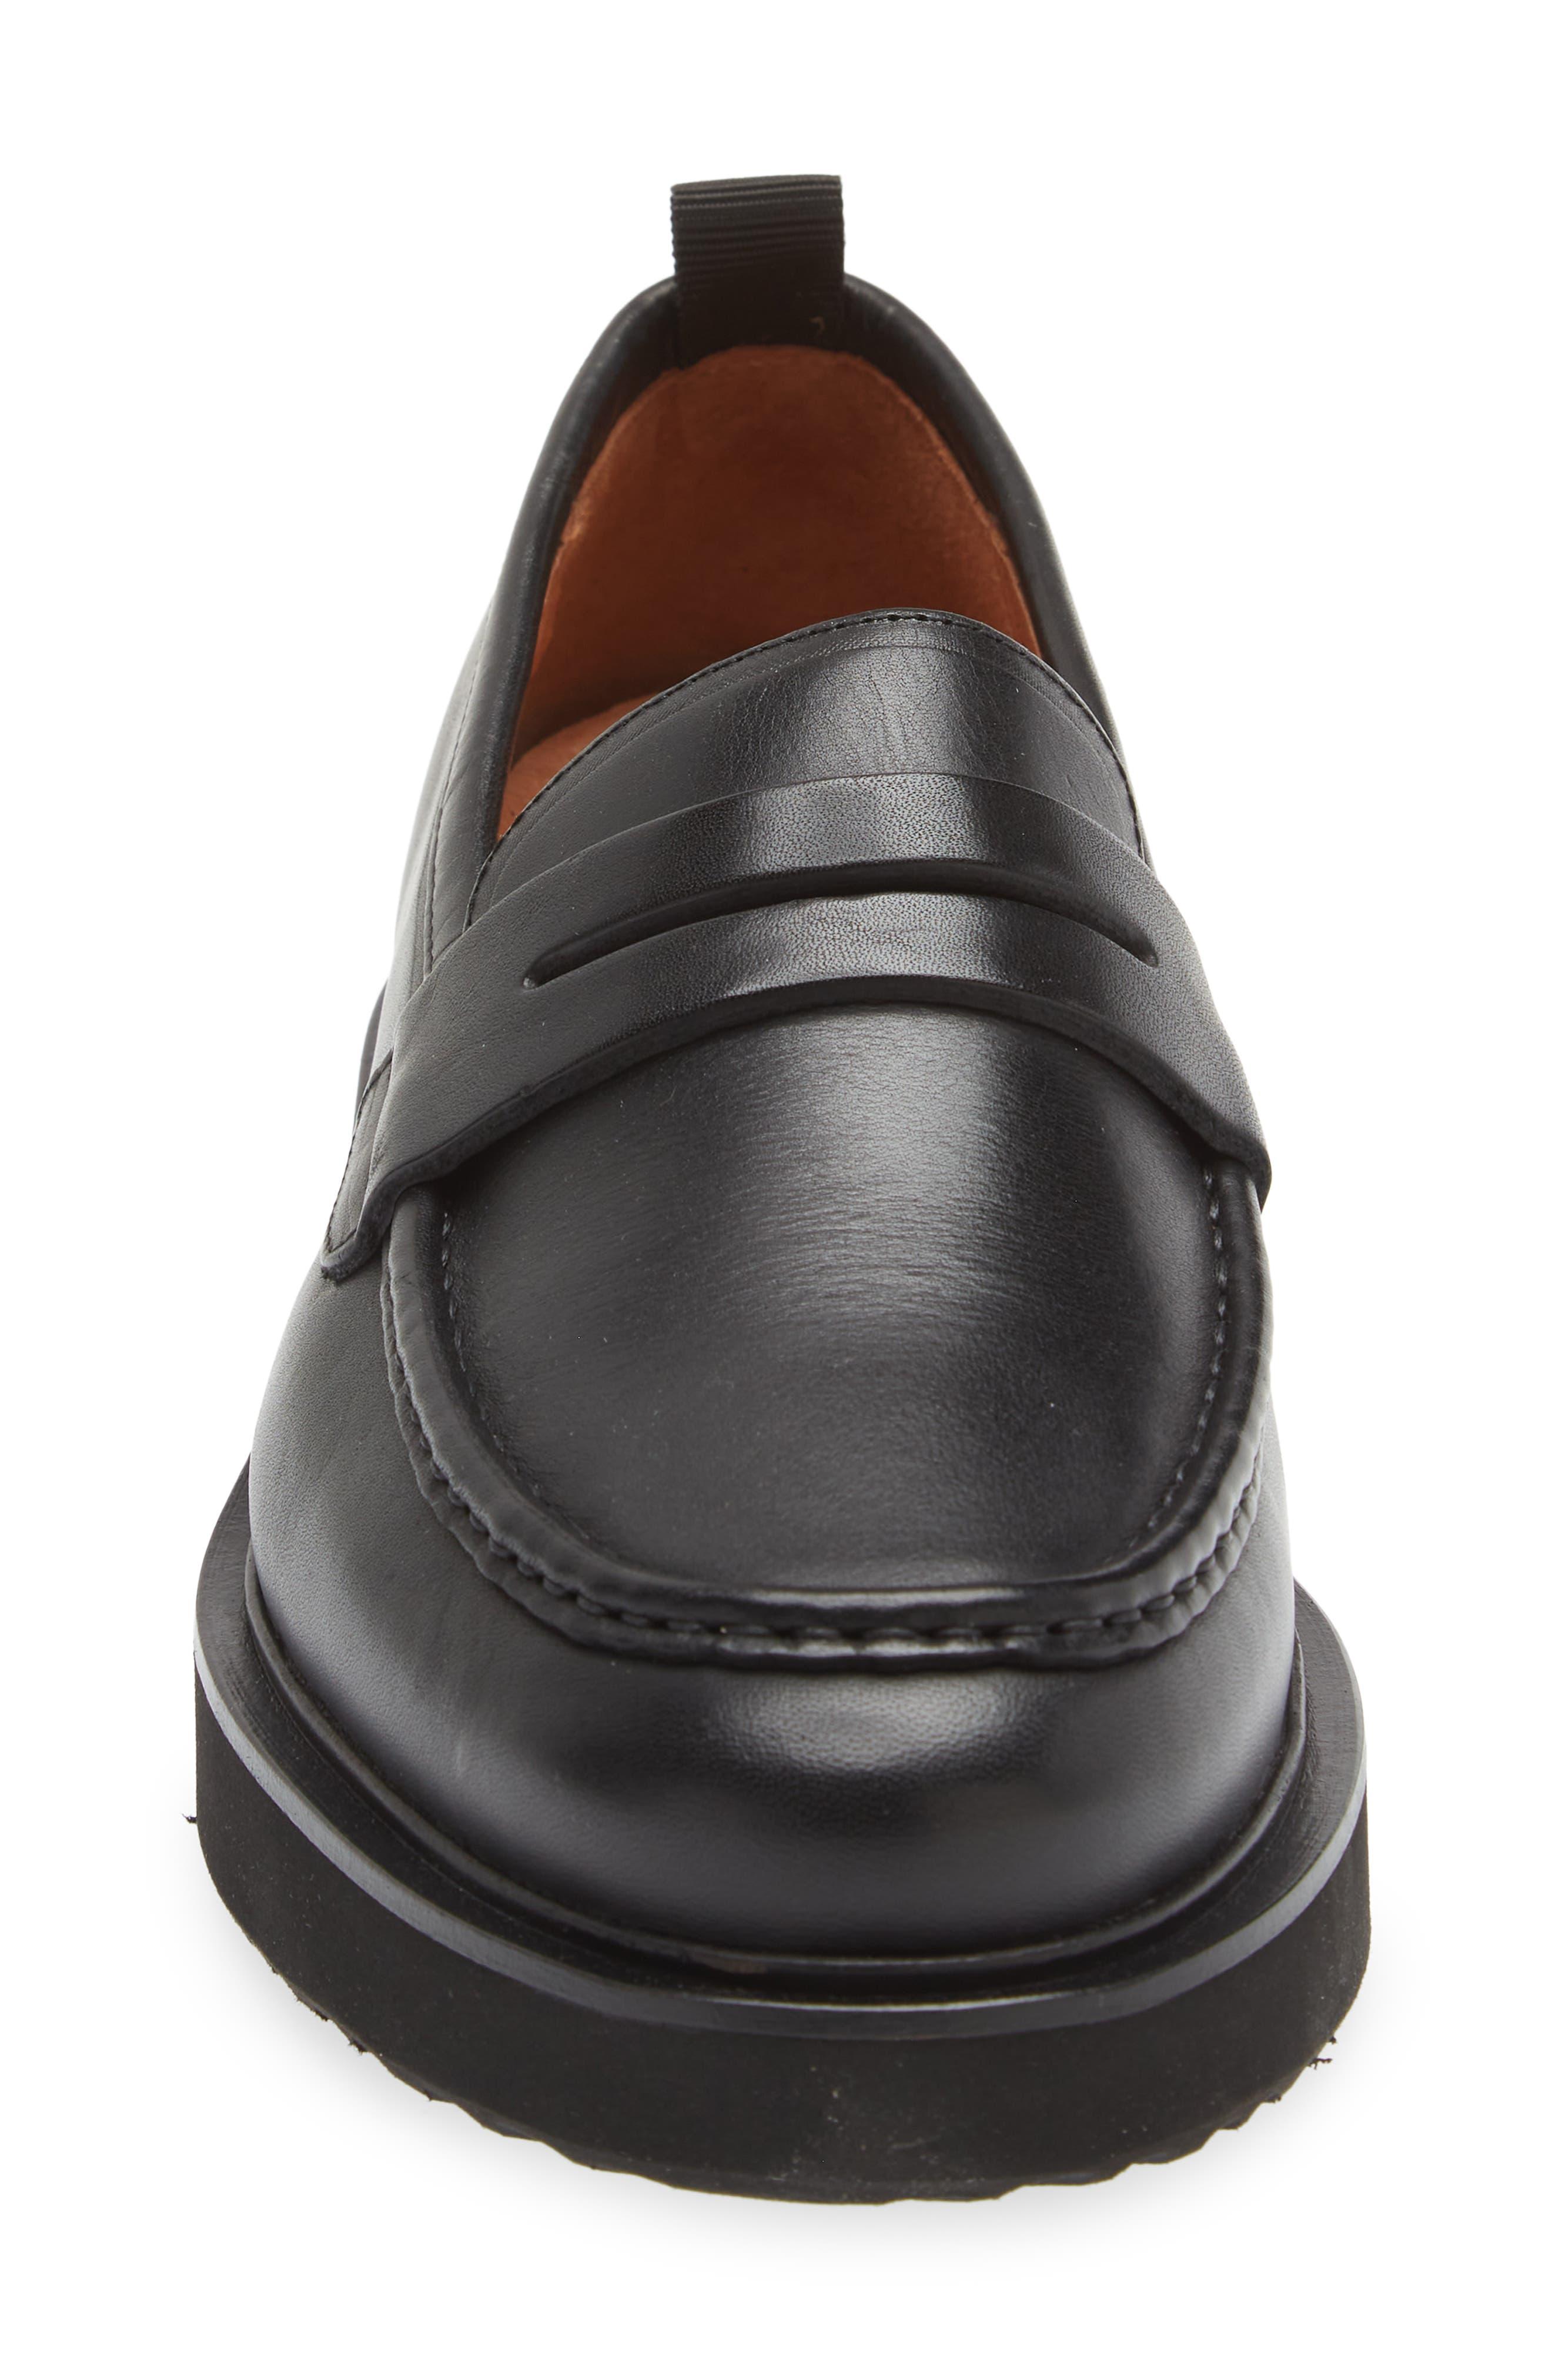 The Bear Cosmos Loafer In Black At Nordstrom Rack for Men Lyst